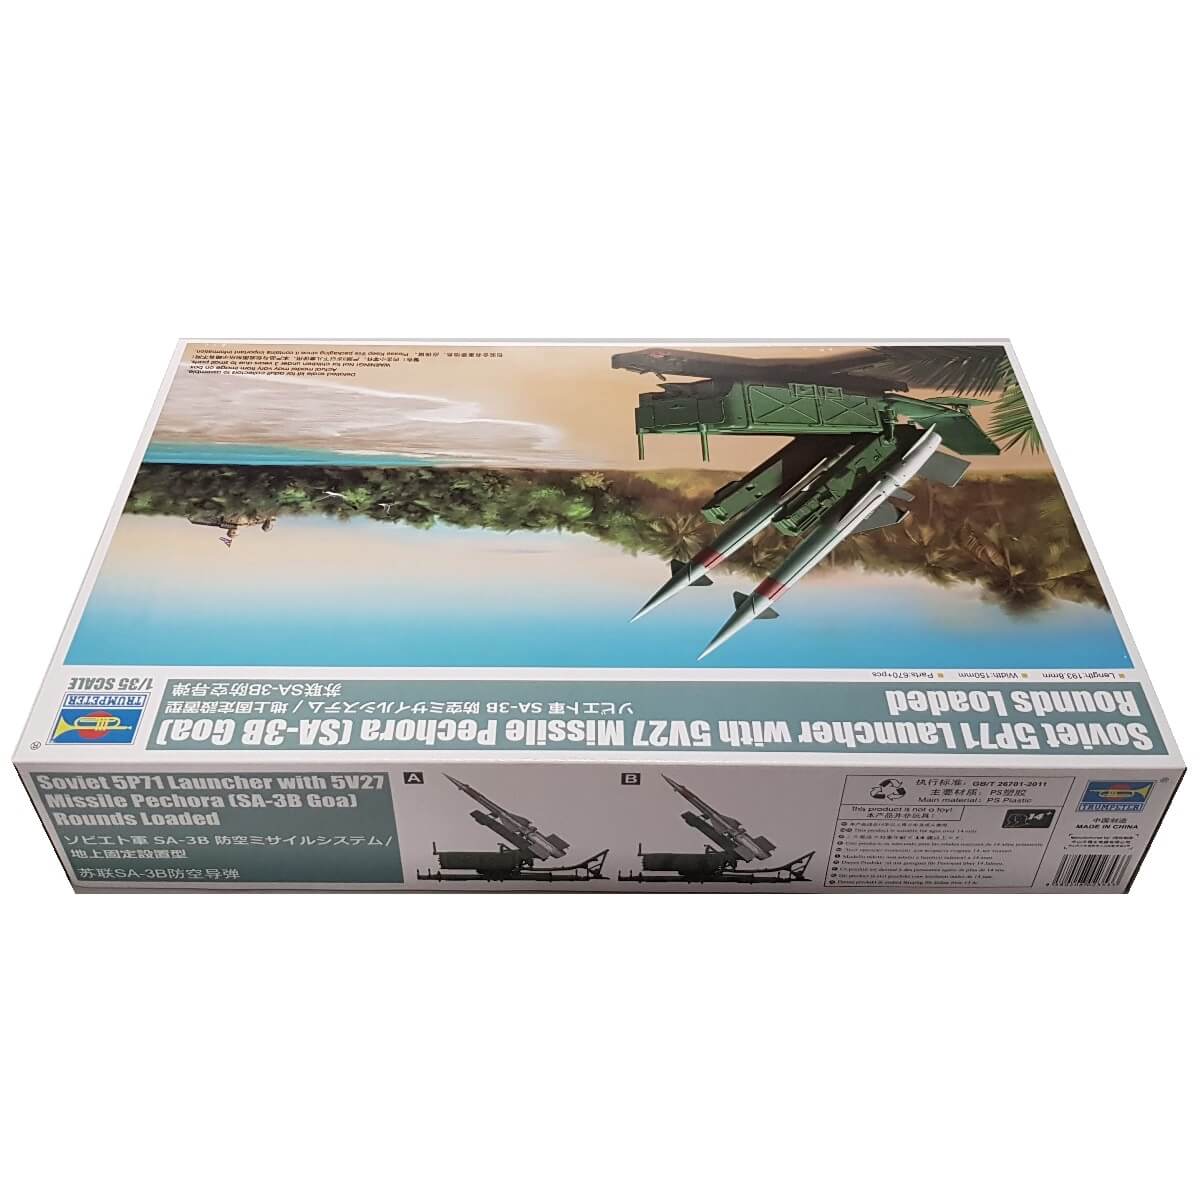 1:35 Soviet 5P71 Launcher with 5V27 Missile Pechora (SA3B Goa) Rounds Loaded - TRUMPETER